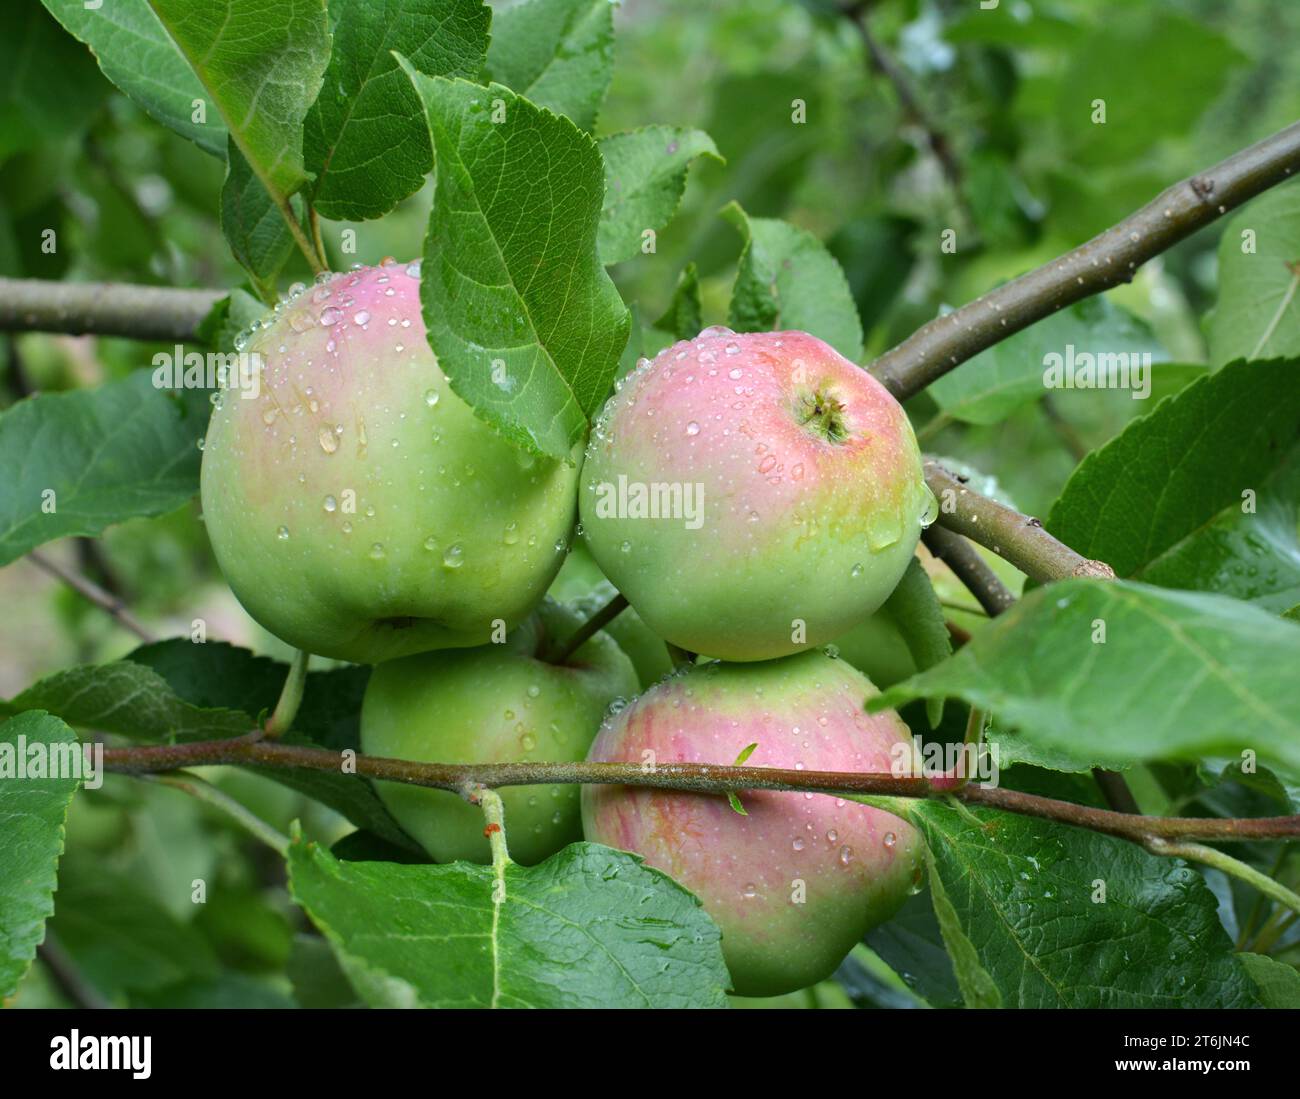 In the orchard, apples ripen on the tree branch Stock Photo